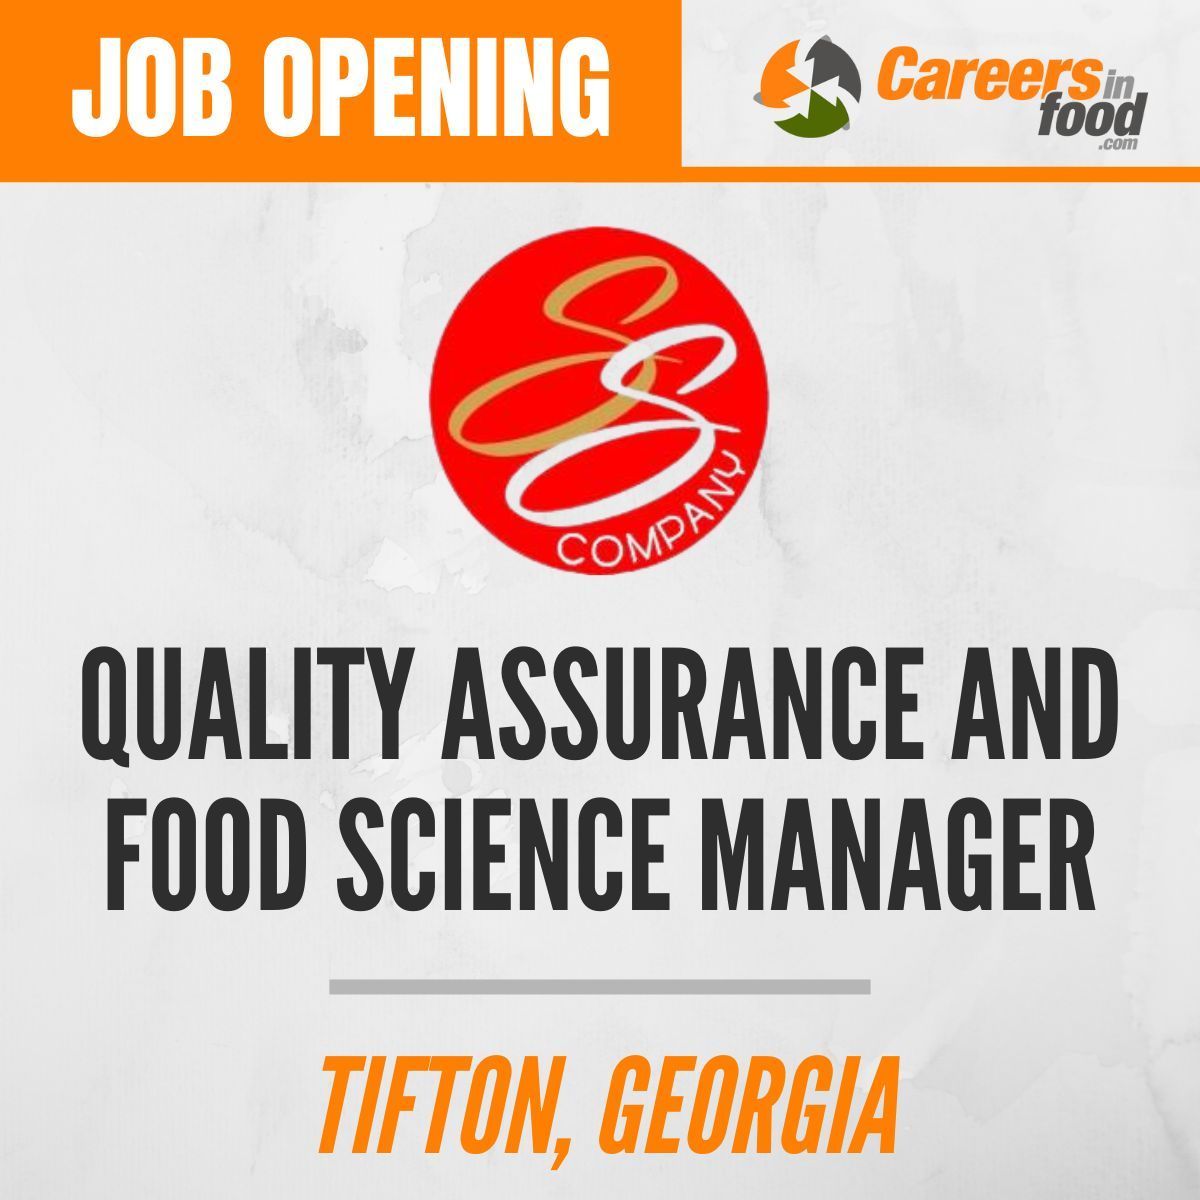 Join the team at Superior Sauce Company as a Quality Assurance and #FoodScience Manager in Tifton, Georgia!

You will take a proactive approach in the development and continuous improvement of plant quality performance.

Apply today: careersinfood.com/quality-assura…

#Apply #Jobs #Hiring